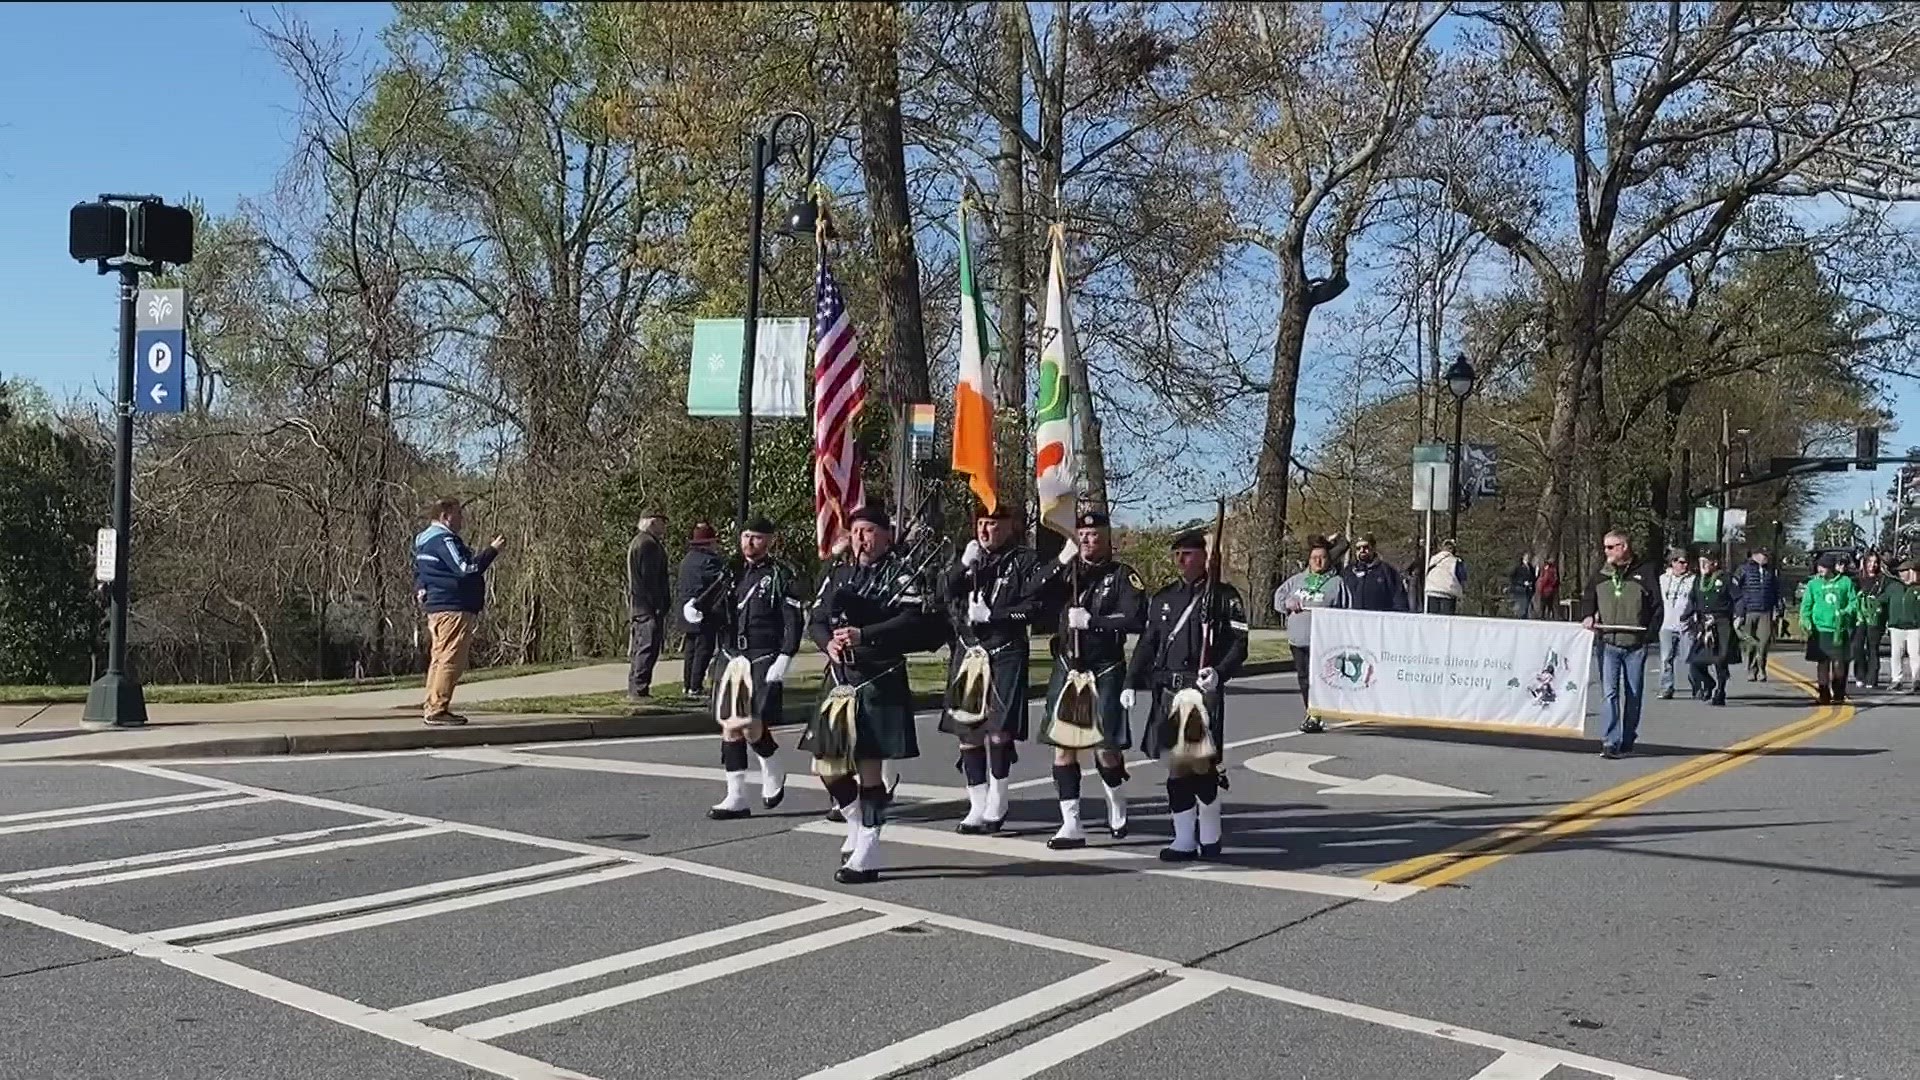 Several performers paraded down the streets to celebrate Georgia's Irish community.